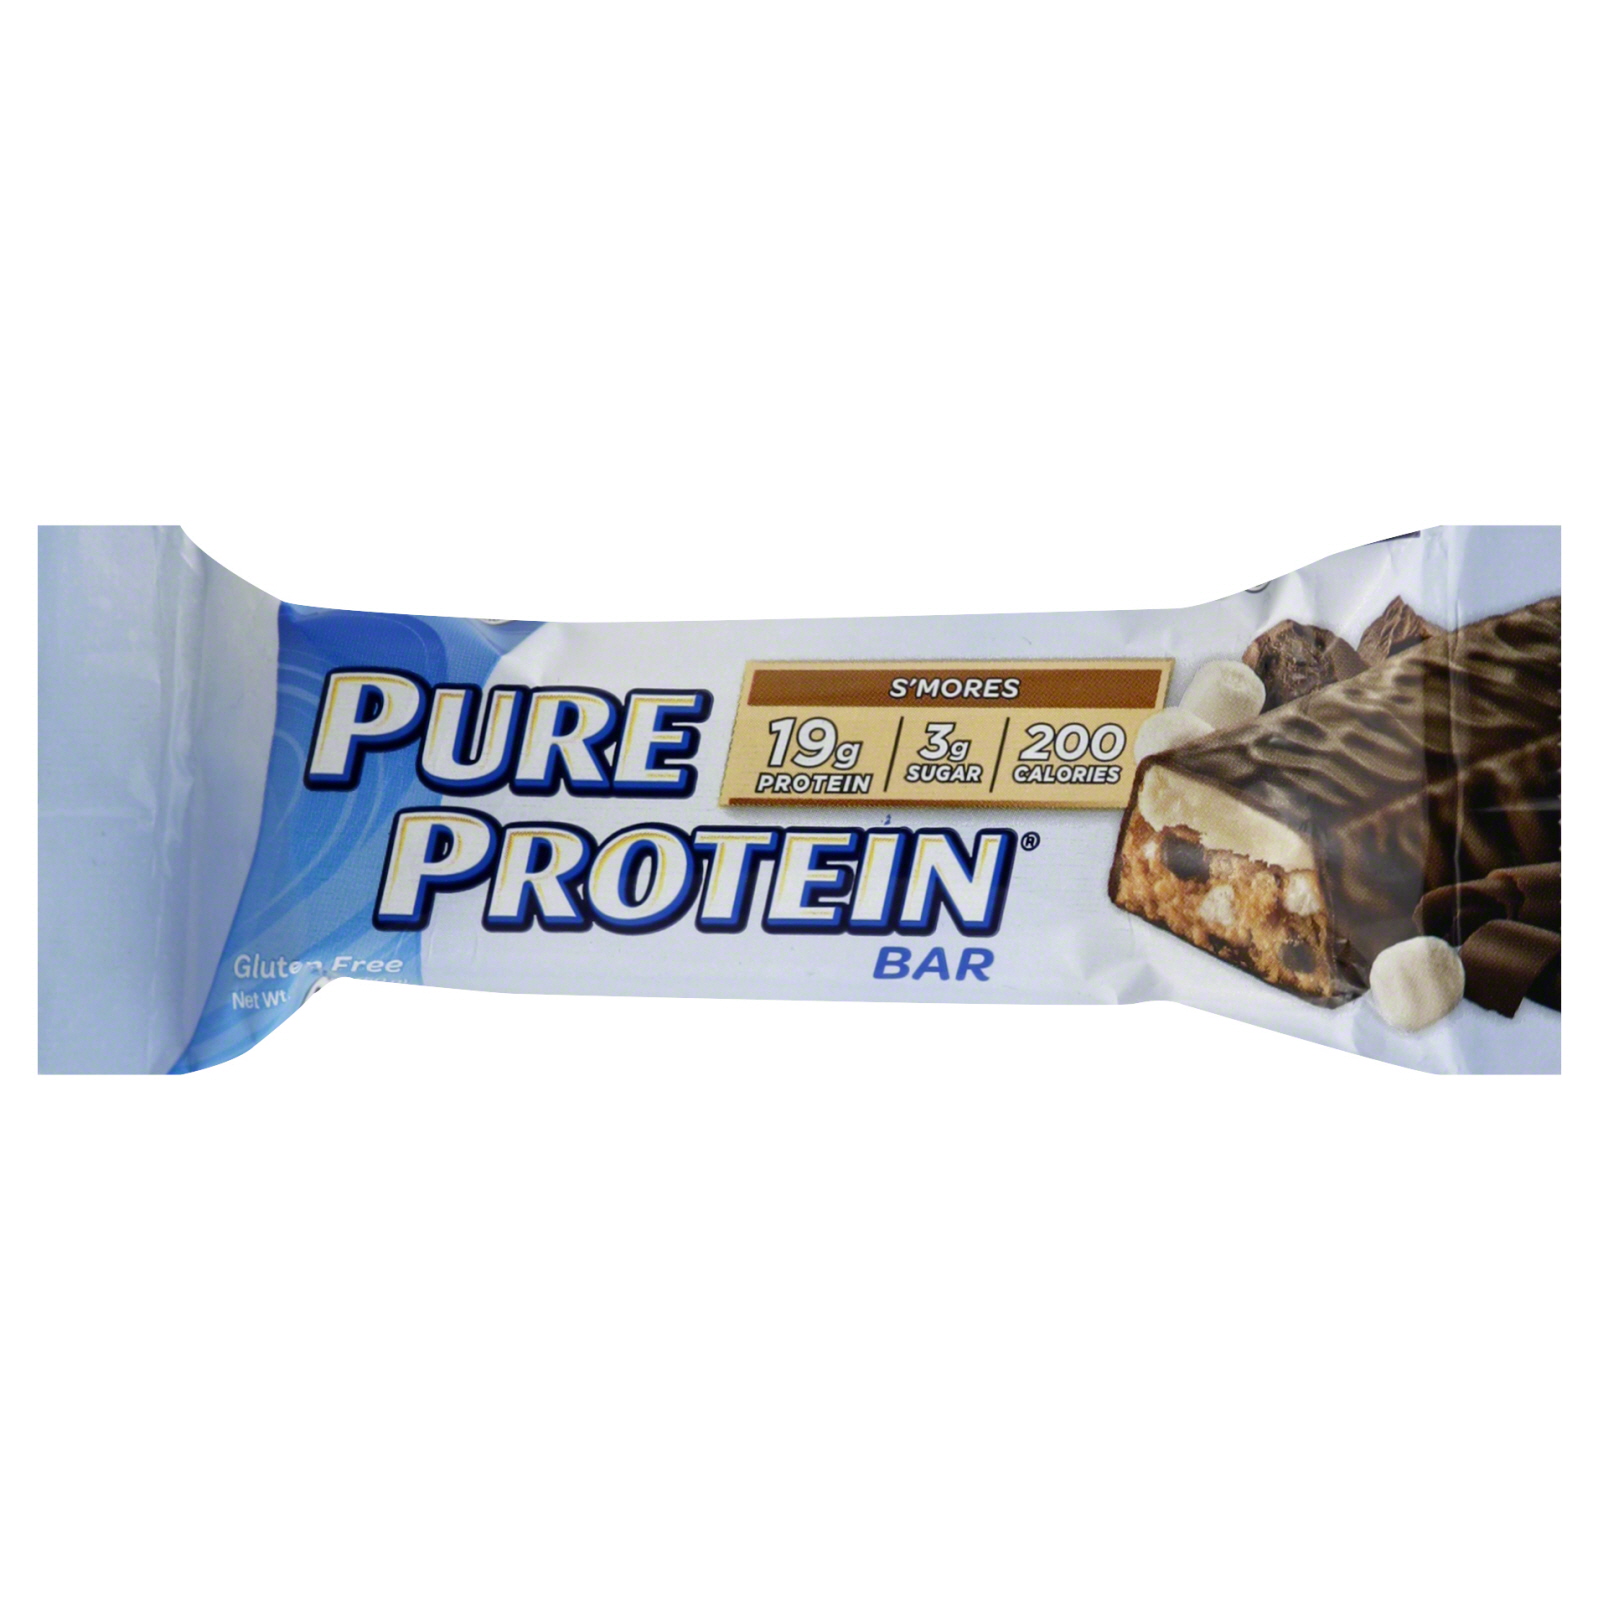 UPC 749826000527 product image for Pure Protein Protein Bar, S'Mores, 1.76 oz (50 g) - REXALL SUNDOWN, INC. | upcitemdb.com